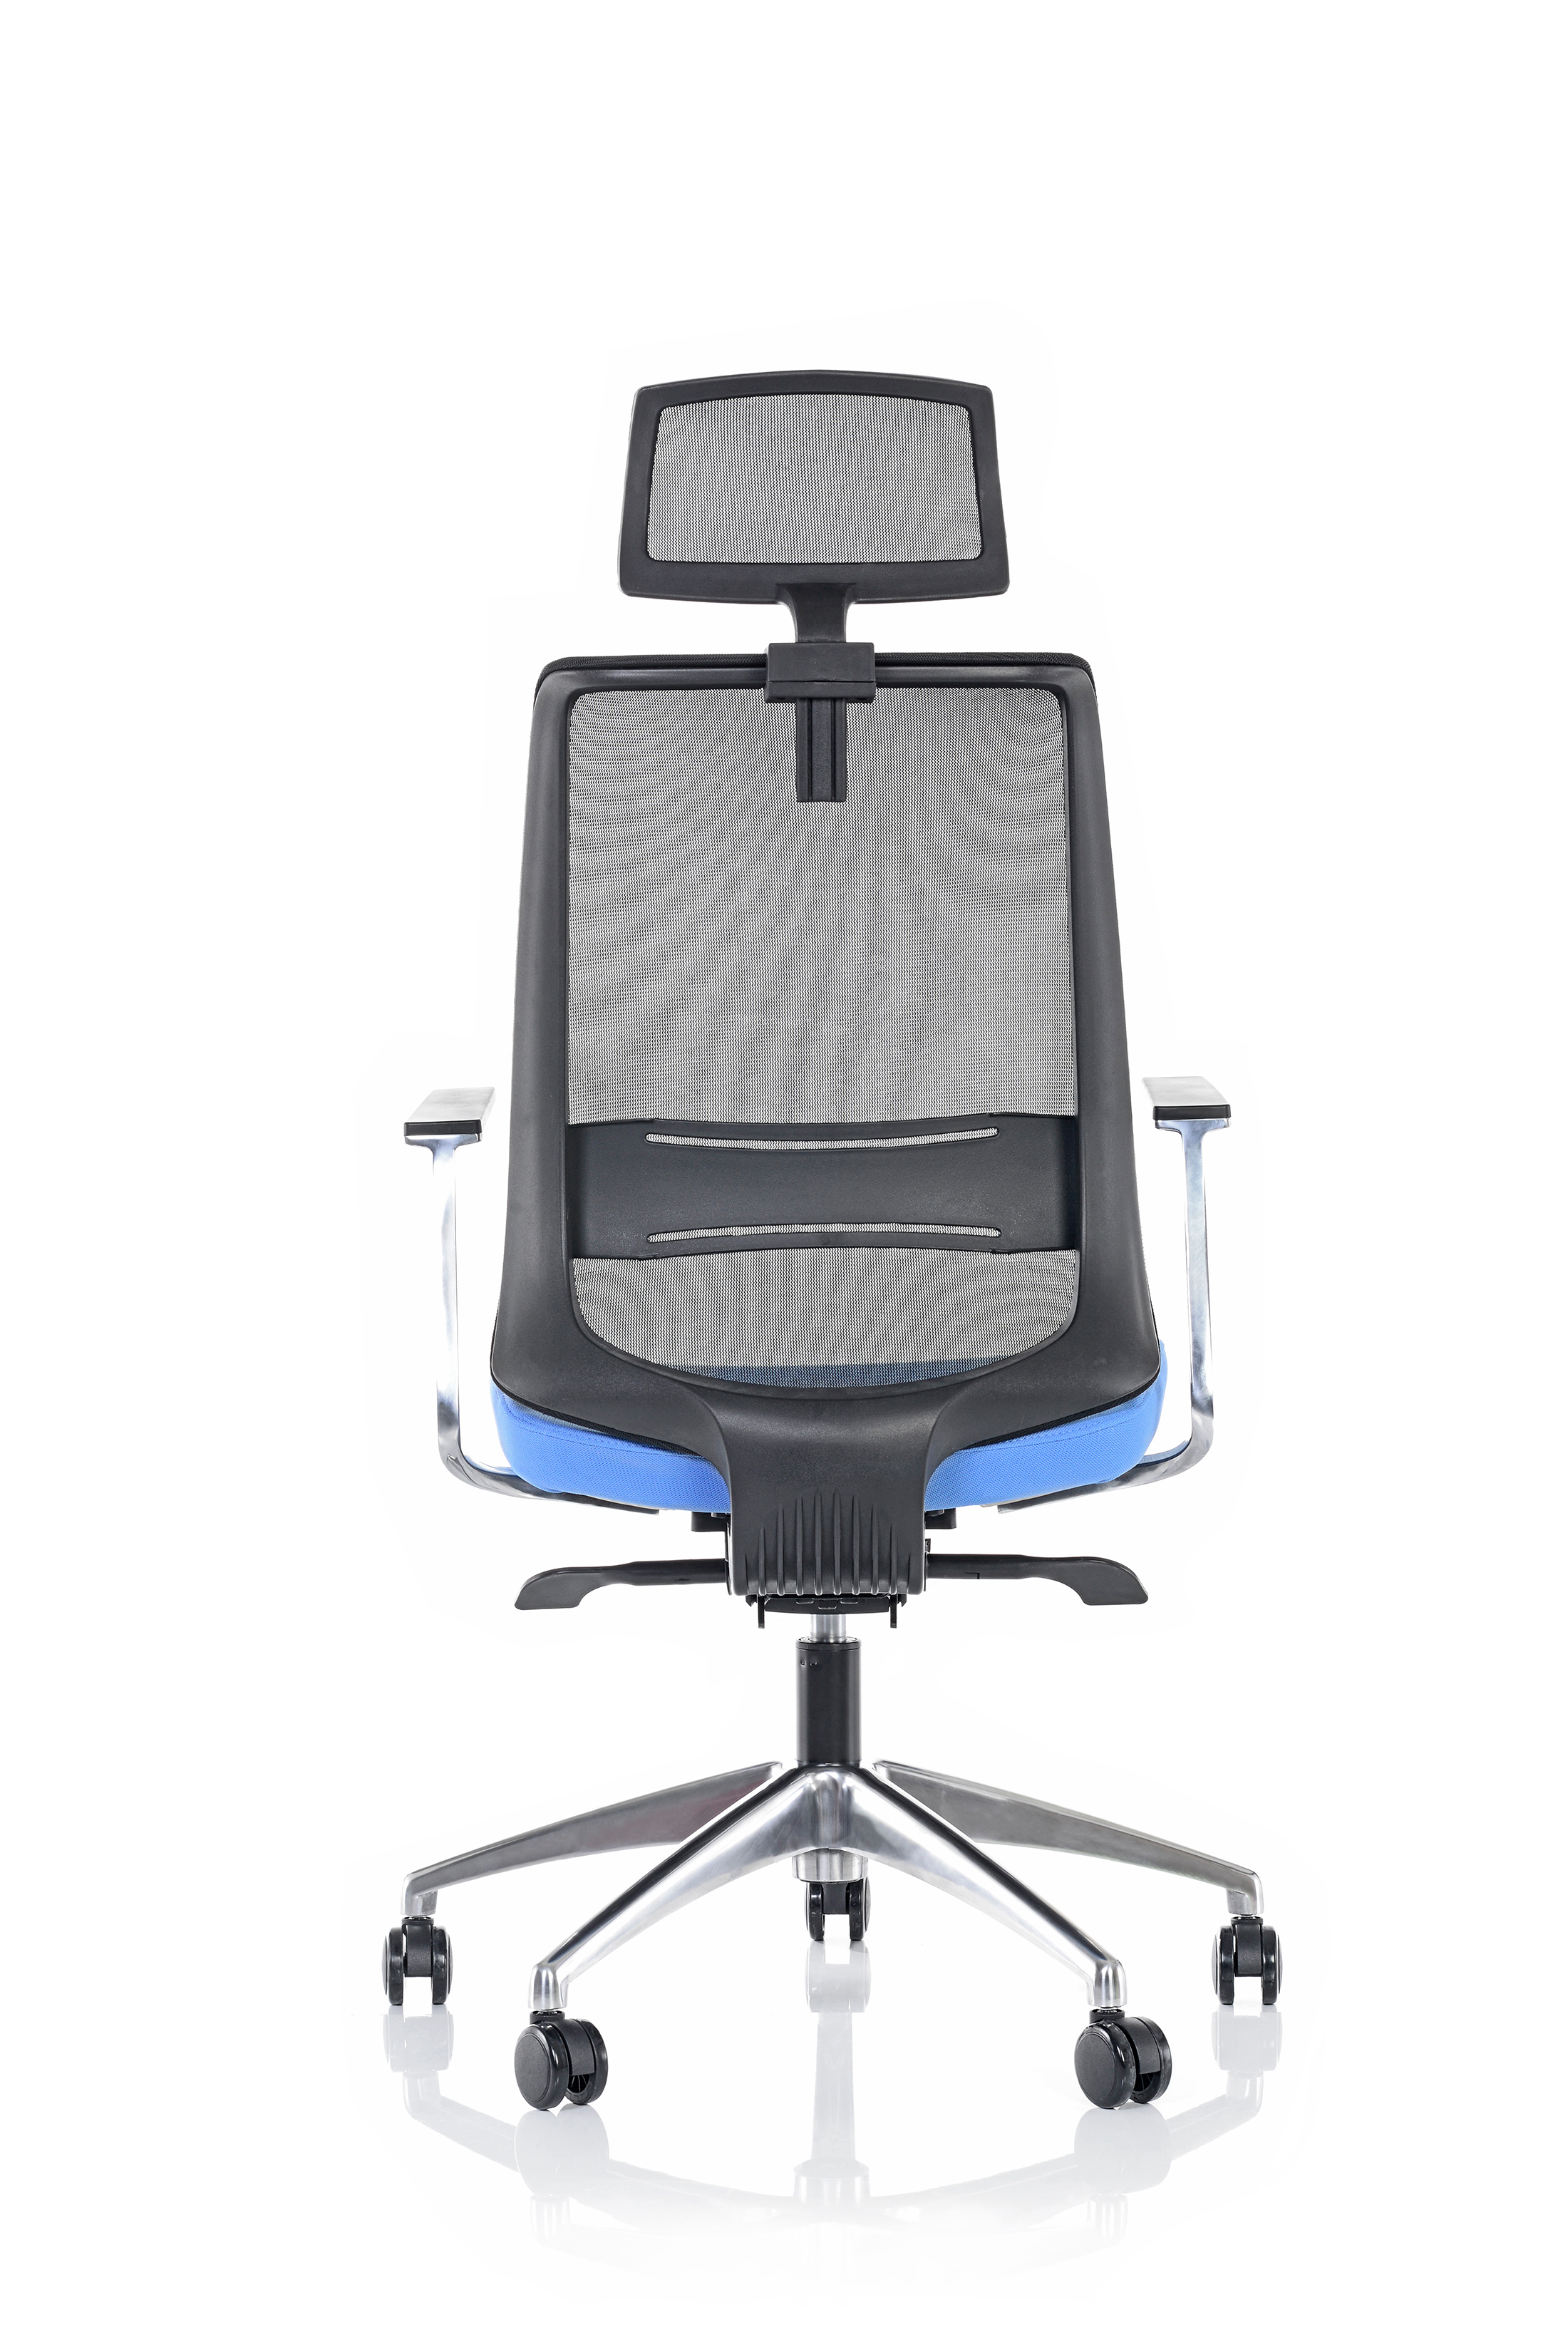 MERCUR 000C MANAGER CHAIR